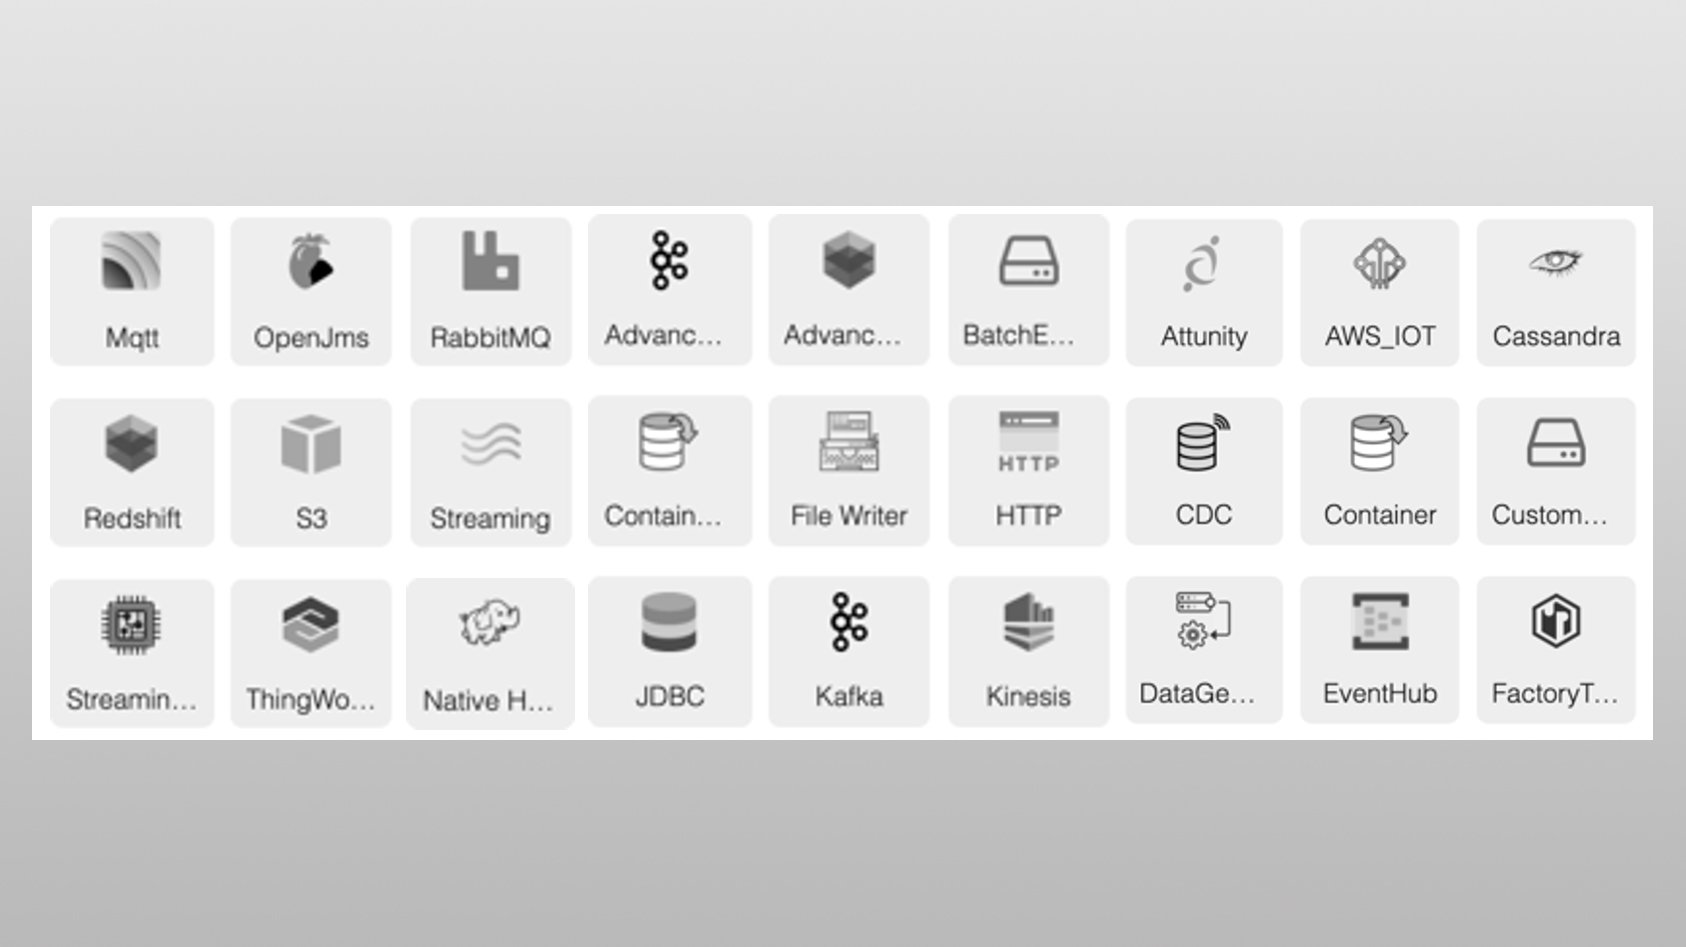 Screen capture from FactoryTalk DataFlowML software that show icons for available out-of-the-box 